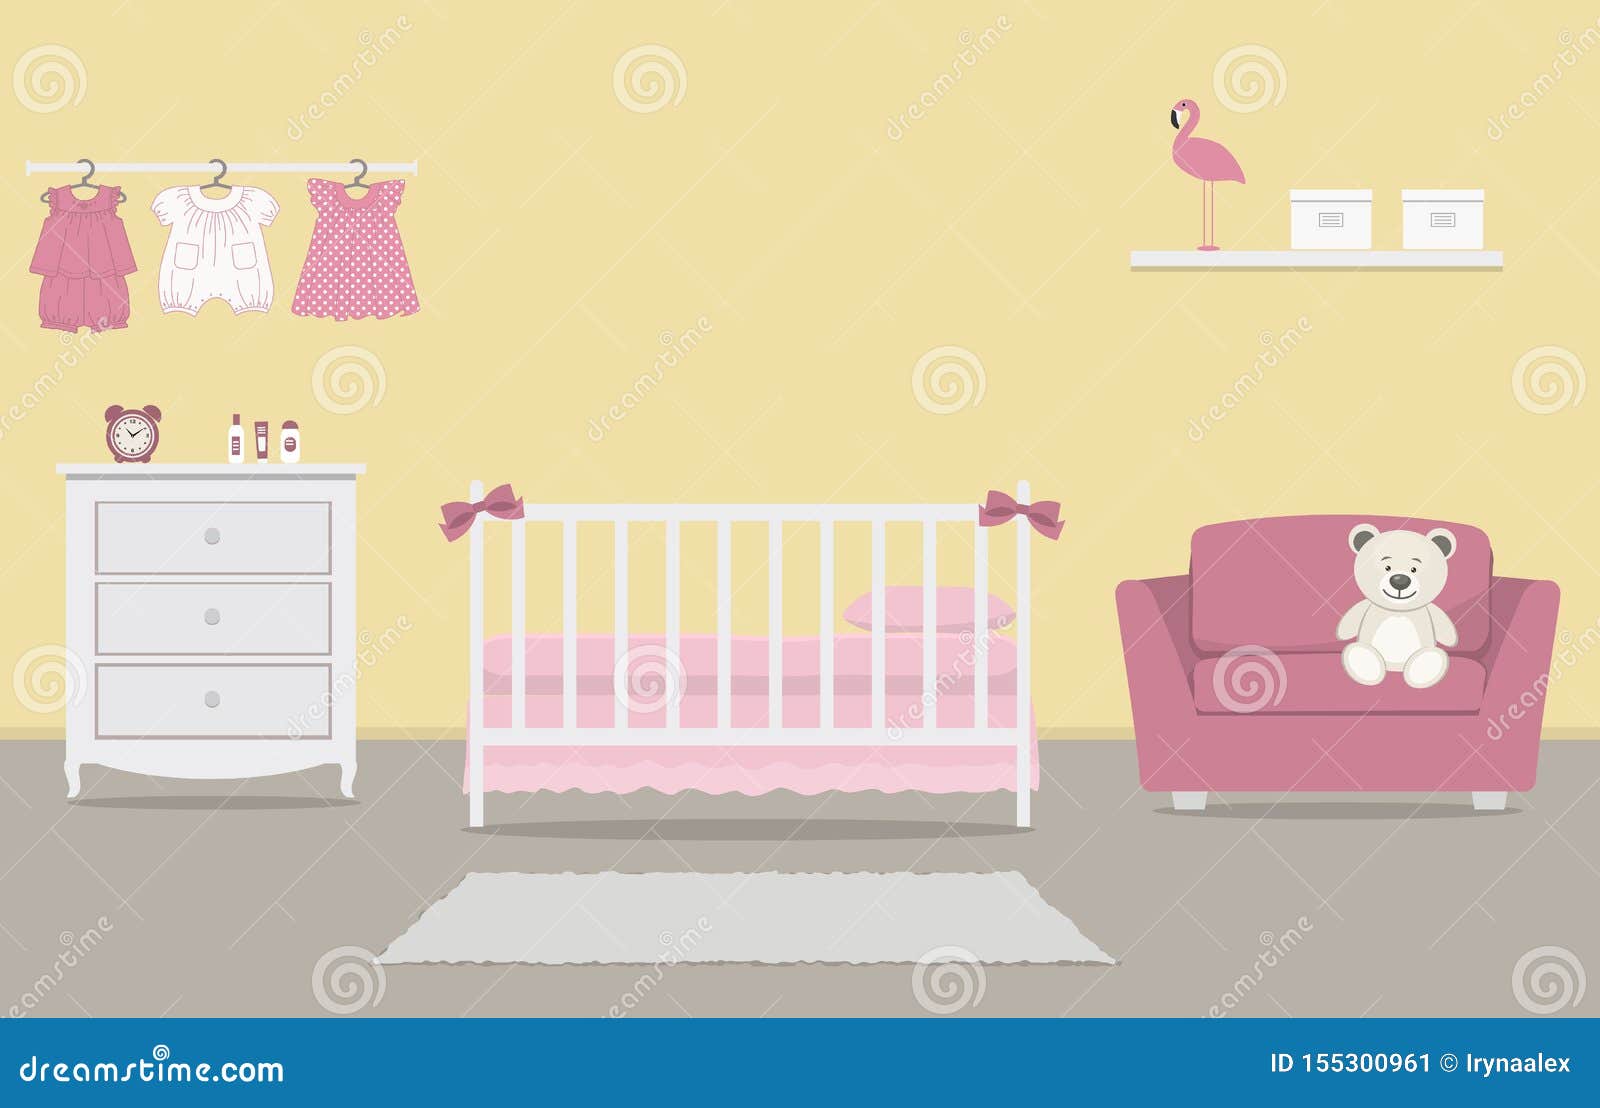 Kid S Room For A Newborn Baby Interior Bedroom For A Baby Girl